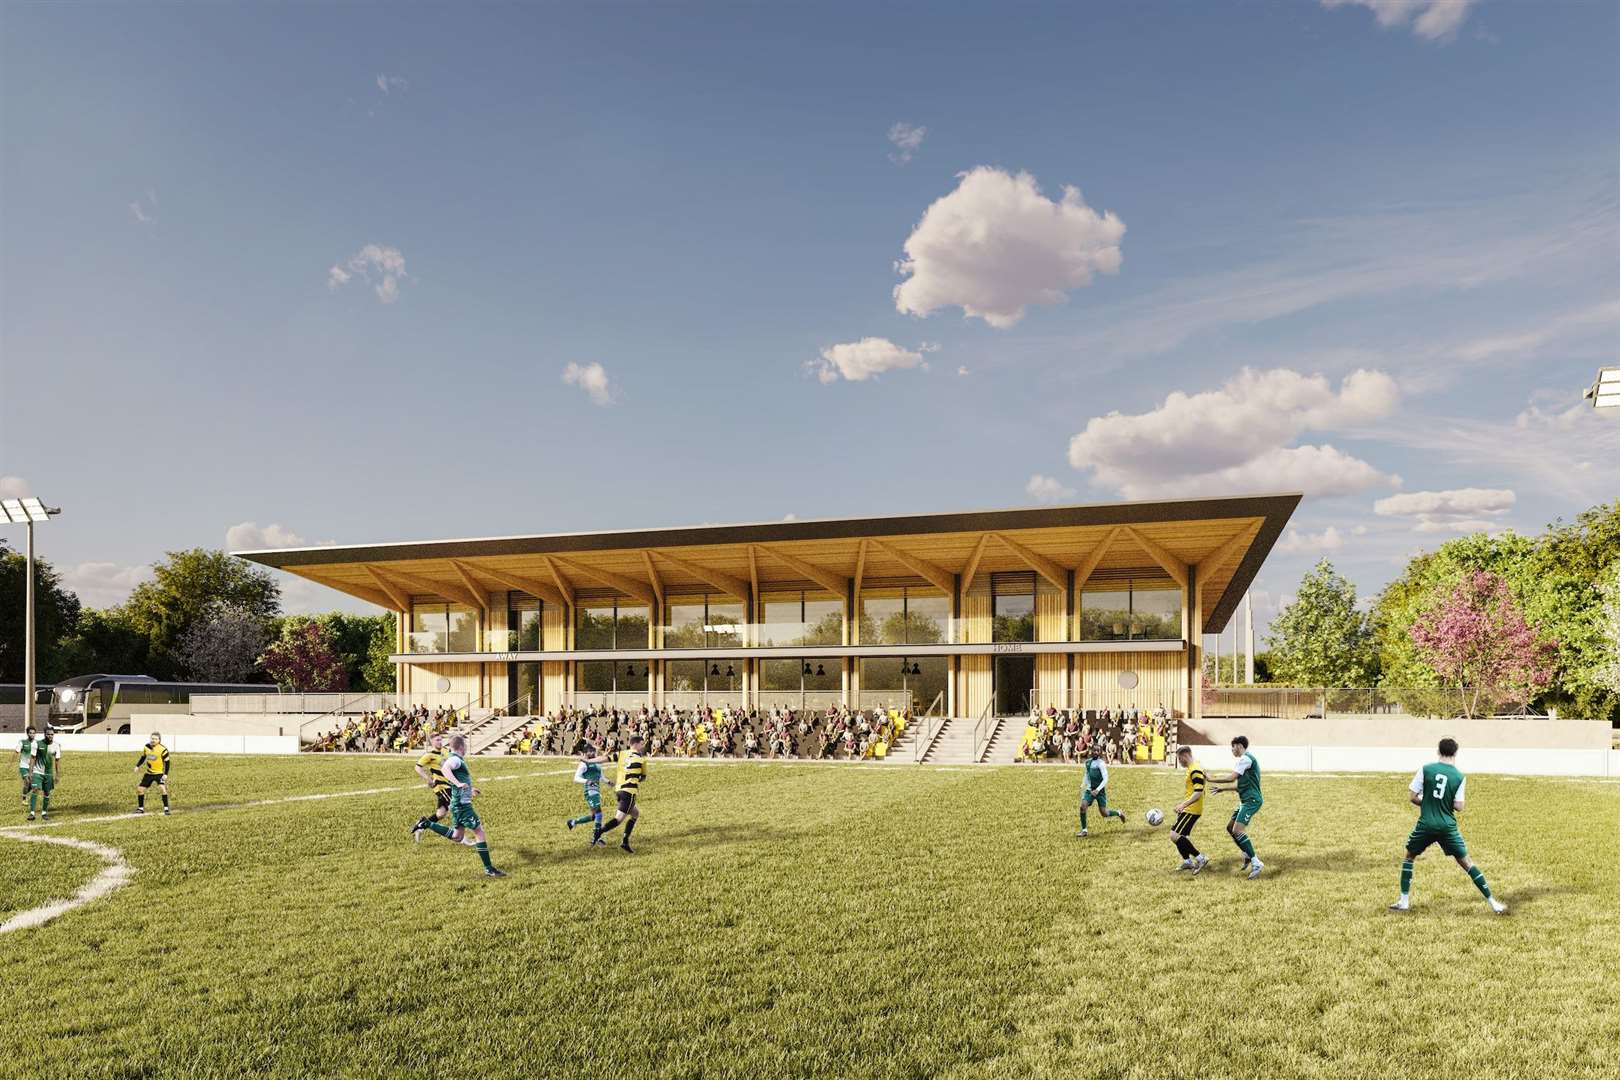 A CGI illustrating how the new Oast Park Sports Hub might look. Image: Hollaway Studio